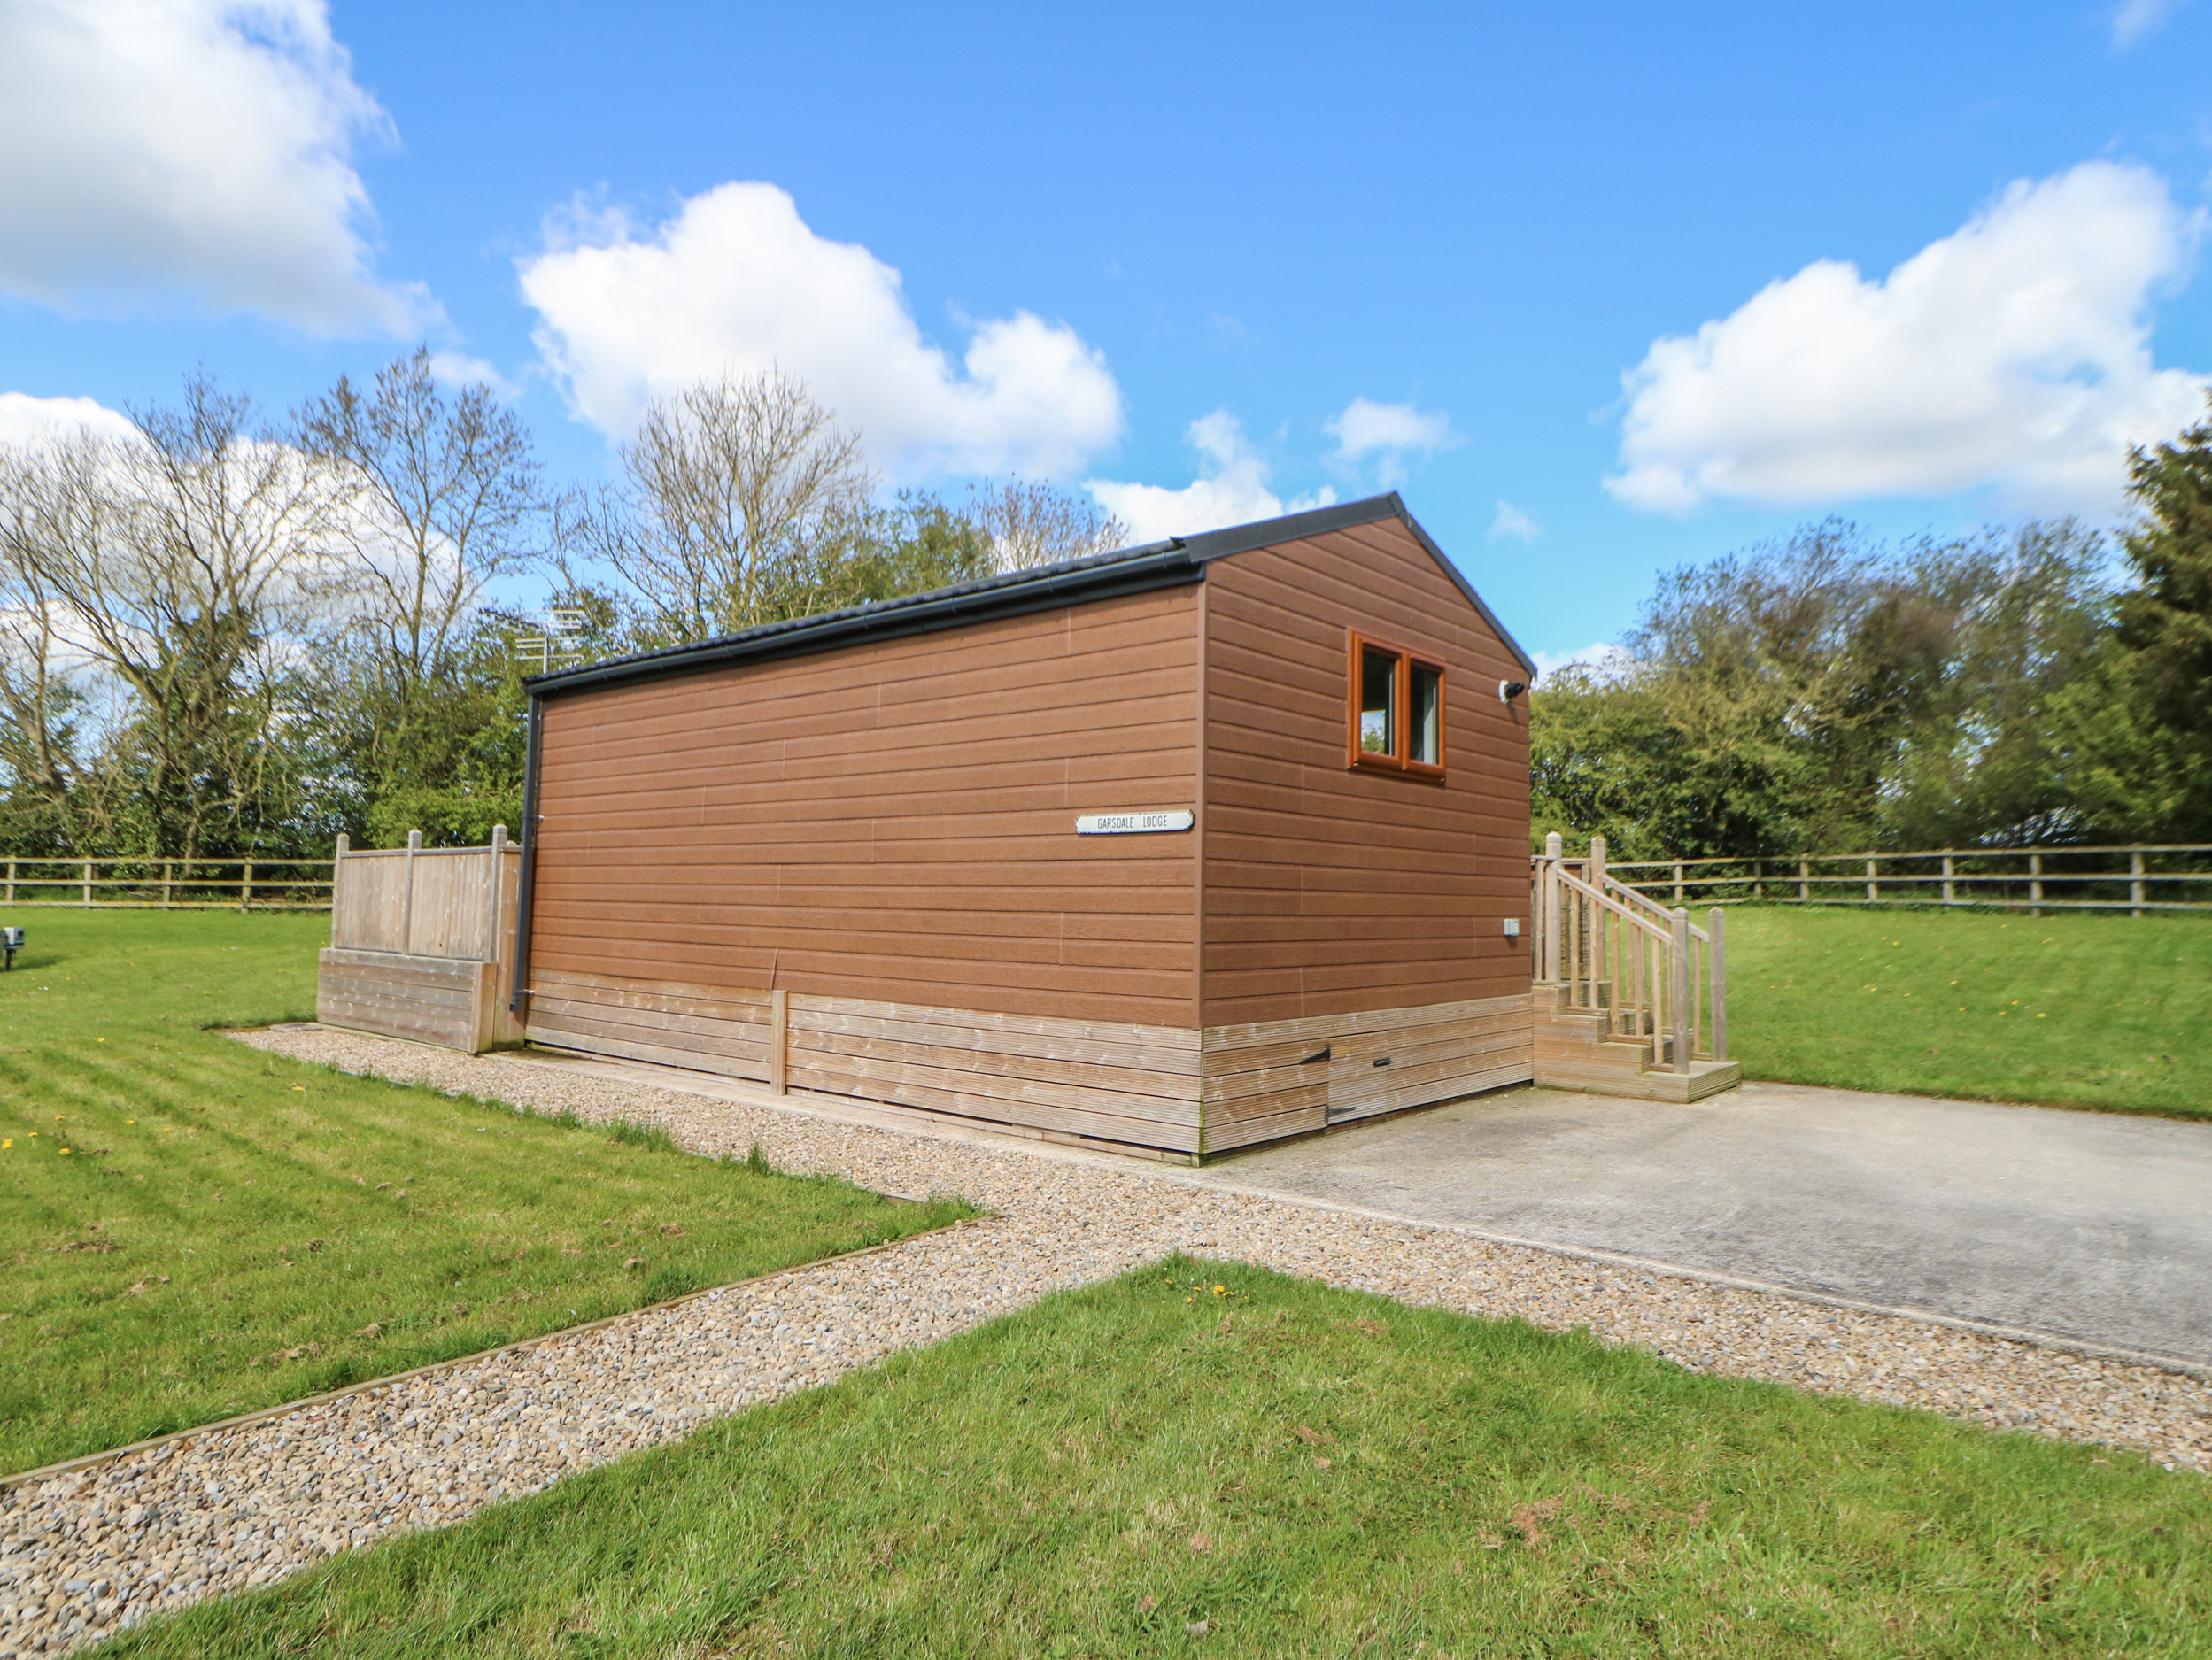 Garsdale Pod  Hutton Rudby,Yorkshire, North York Moors National Park, Open plan, Hot tub, Decking